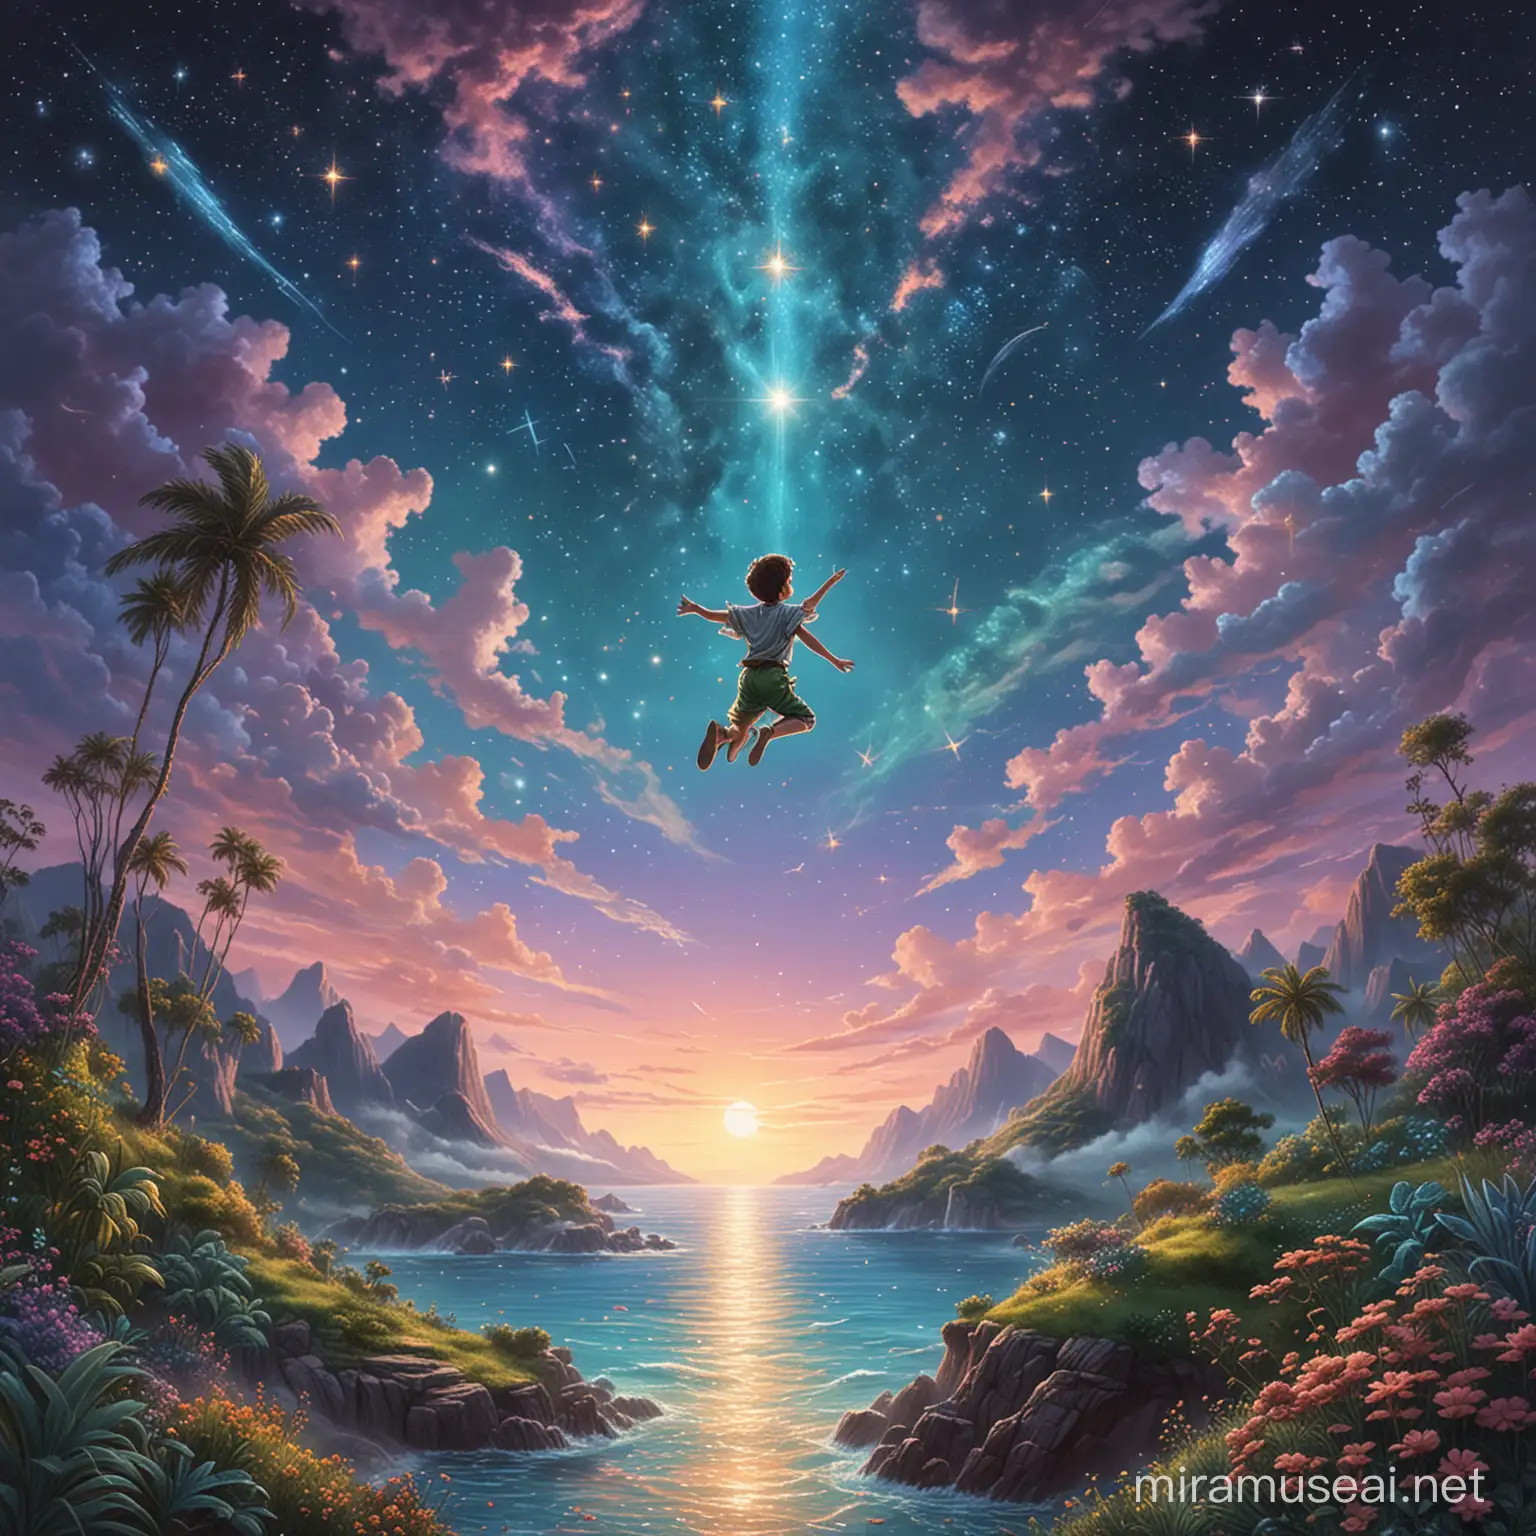 Dreamy Peter Pan Flying Over Verdant Islands in Sparkling Night Sky